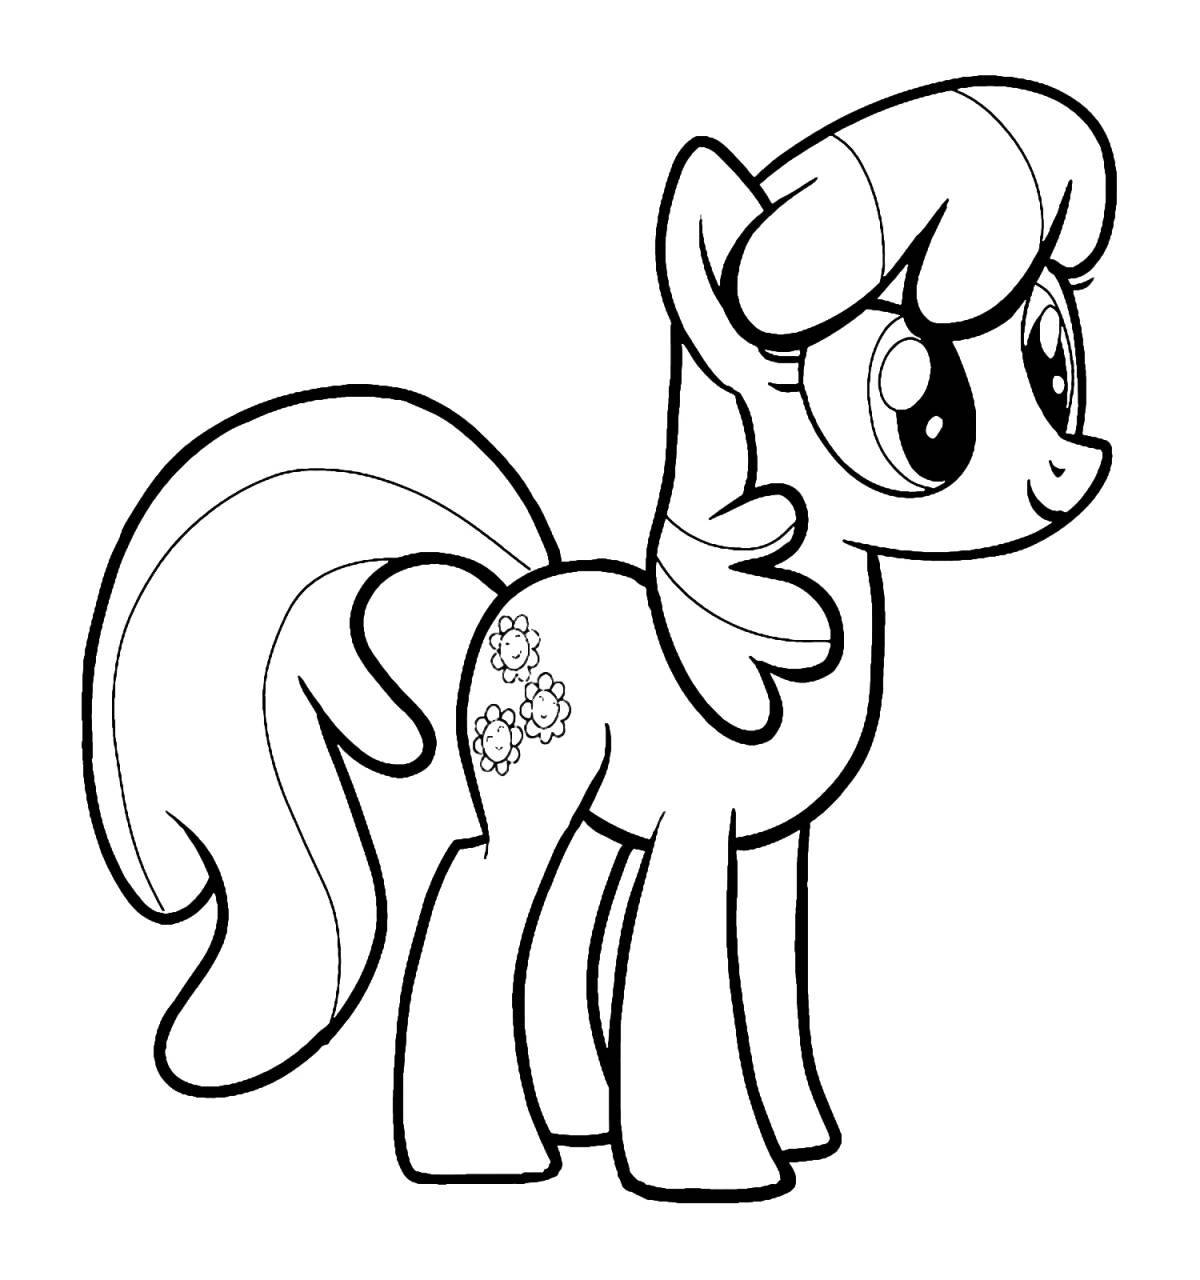 Blessed pony coloring page